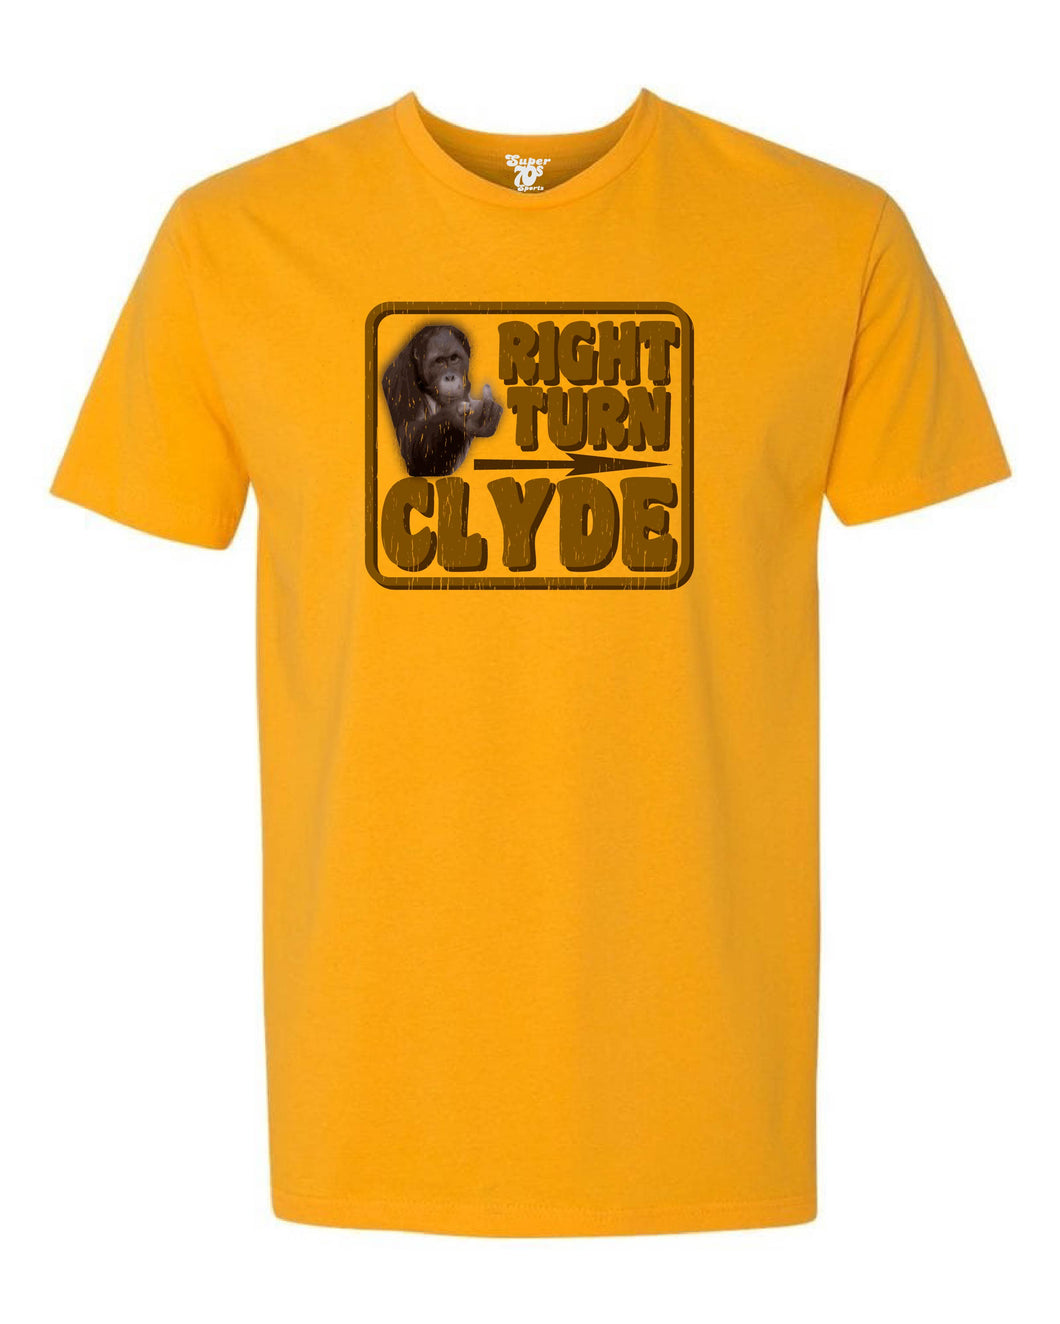 Right Turn Clyde Tee